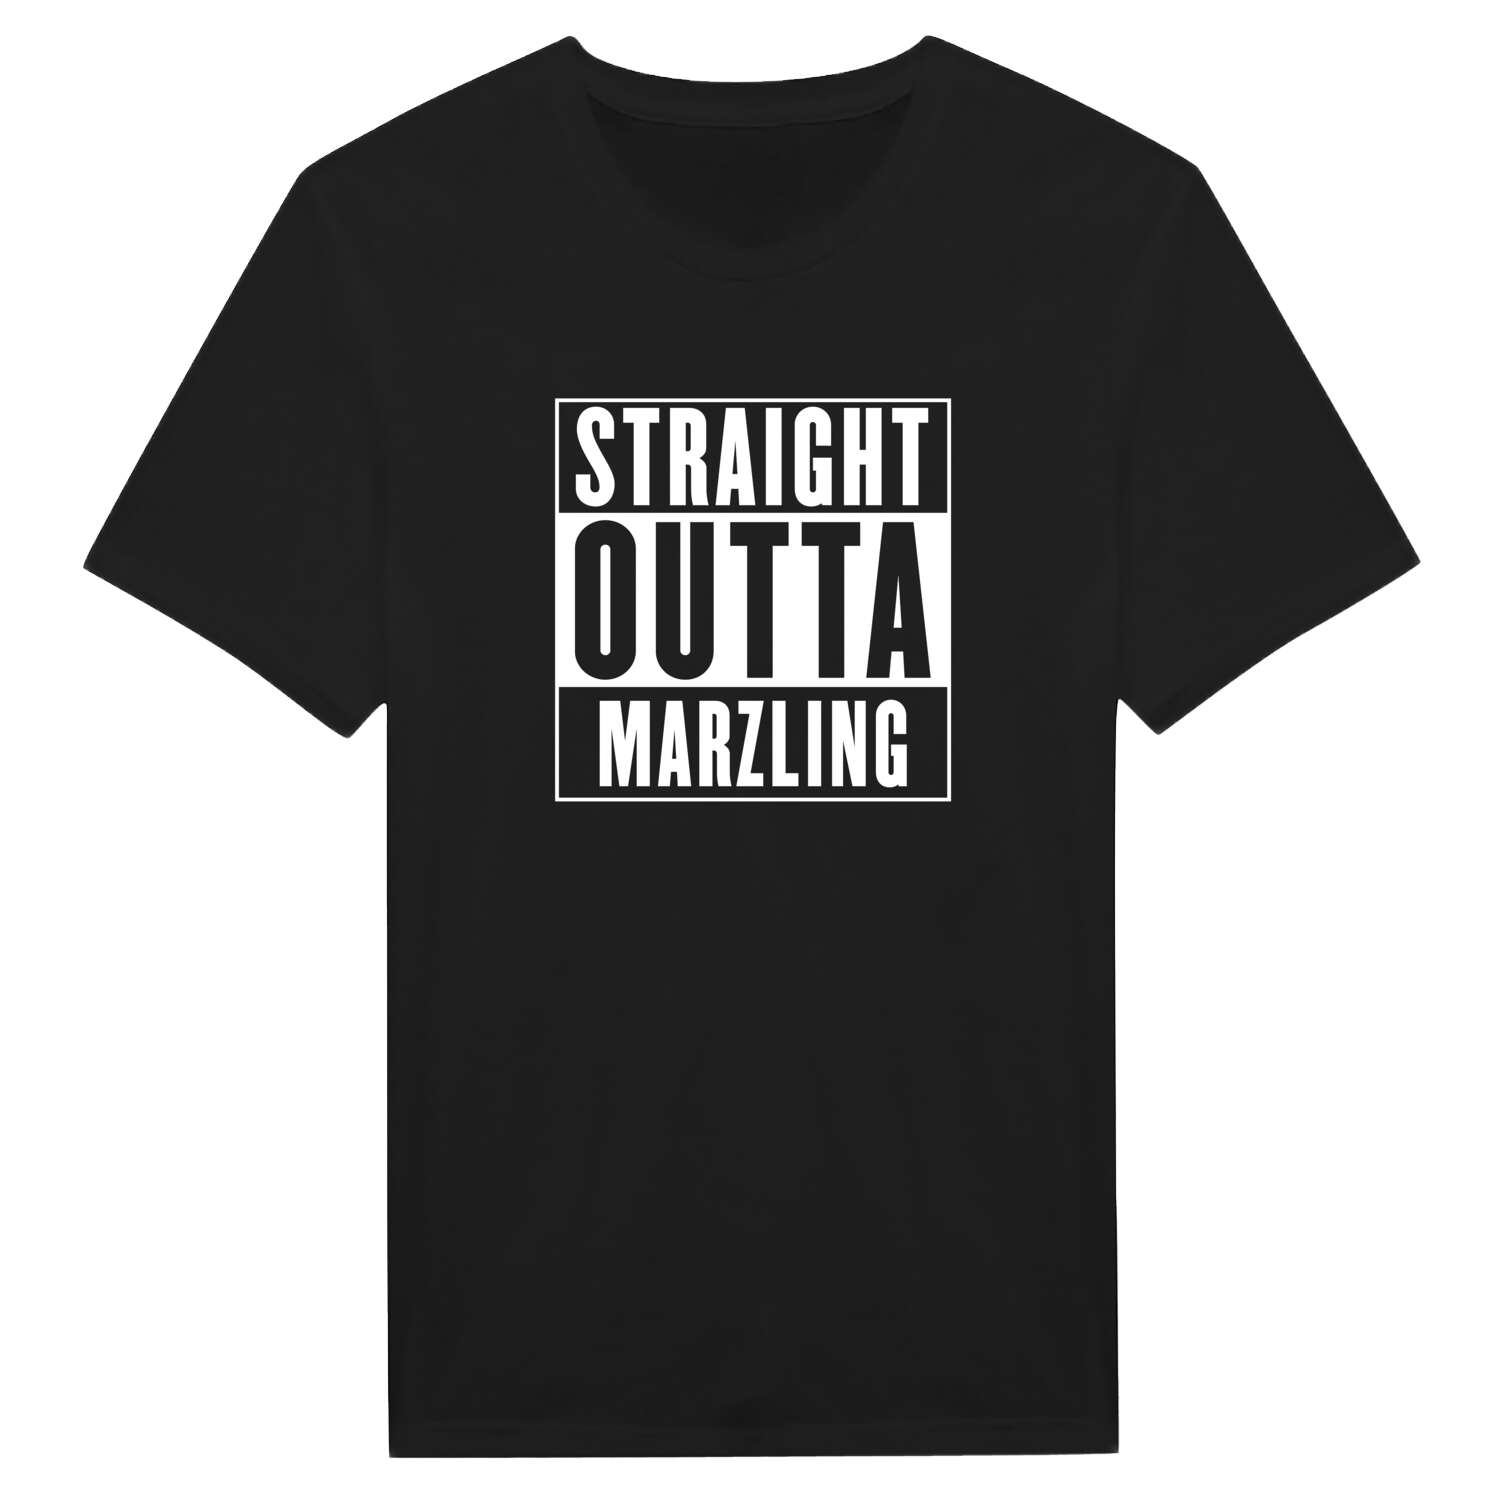 Marzling T-Shirt »Straight Outta«